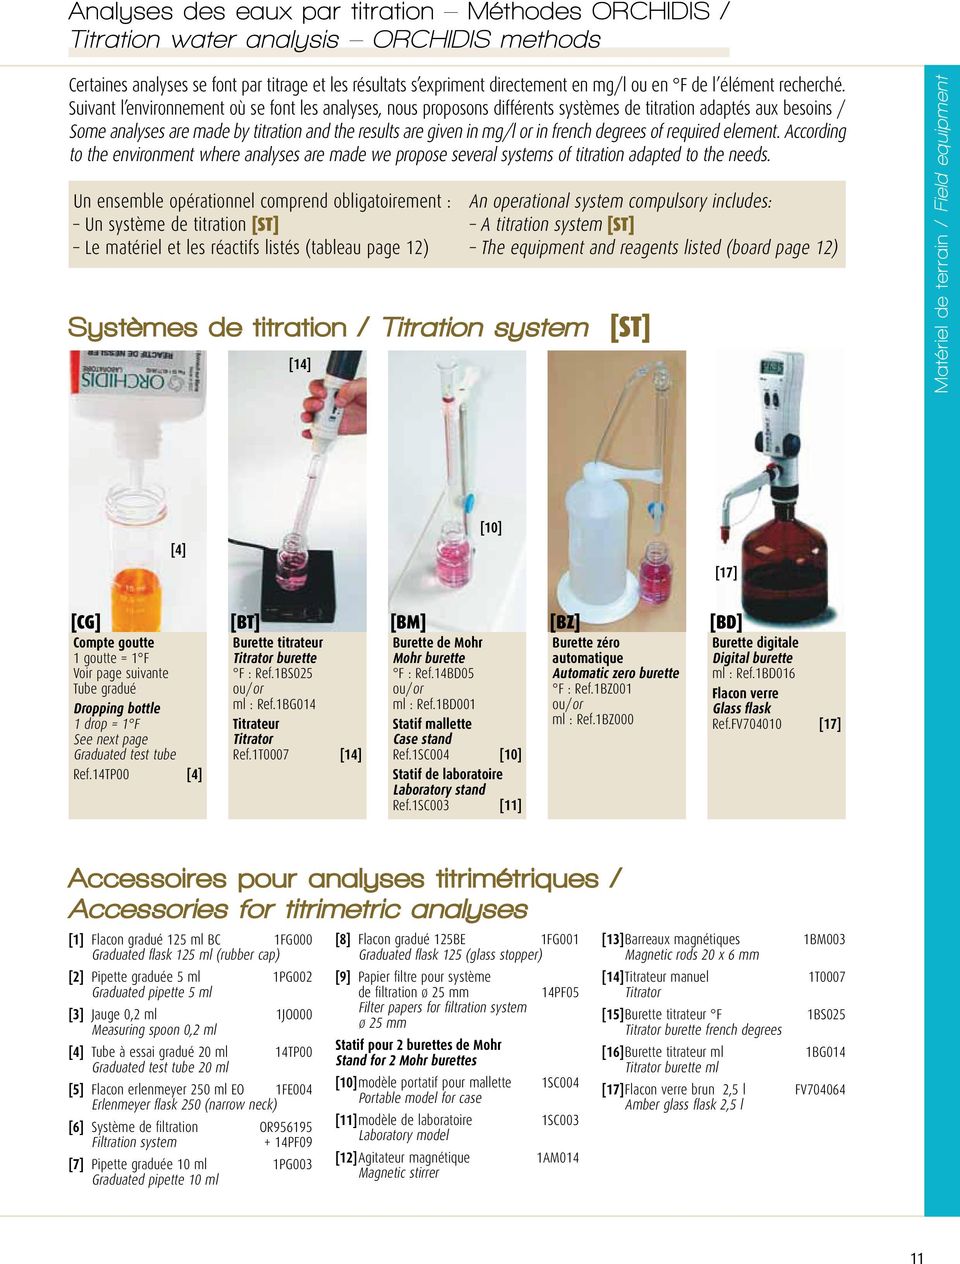 french degrees of required element. According to the environment where analyses are made we propose several systems of titration adapted to the needs.